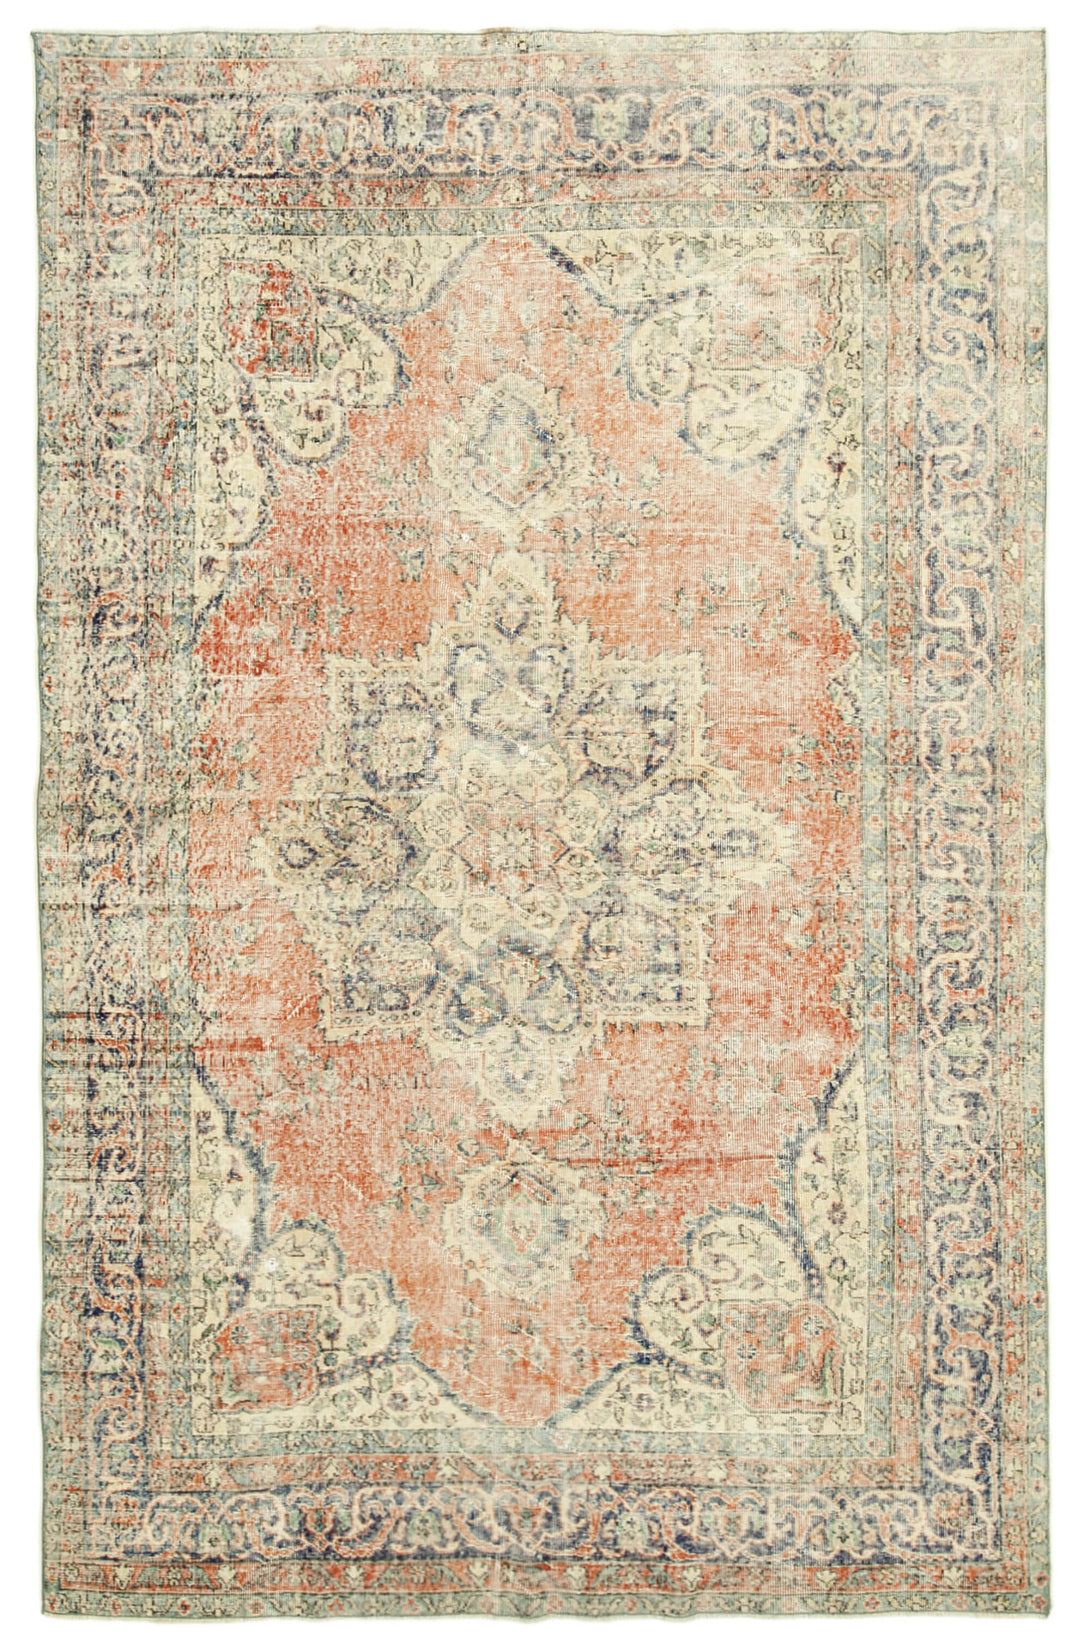 Handmade White Wash Area Rug > Design# OL-AC-38804 > Size: 6'-9" x 10'-9", Carpet Culture Rugs, Handmade Rugs, NYC Rugs, New Rugs, Shop Rugs, Rug Store, Outlet Rugs, SoHo Rugs, Rugs in USA